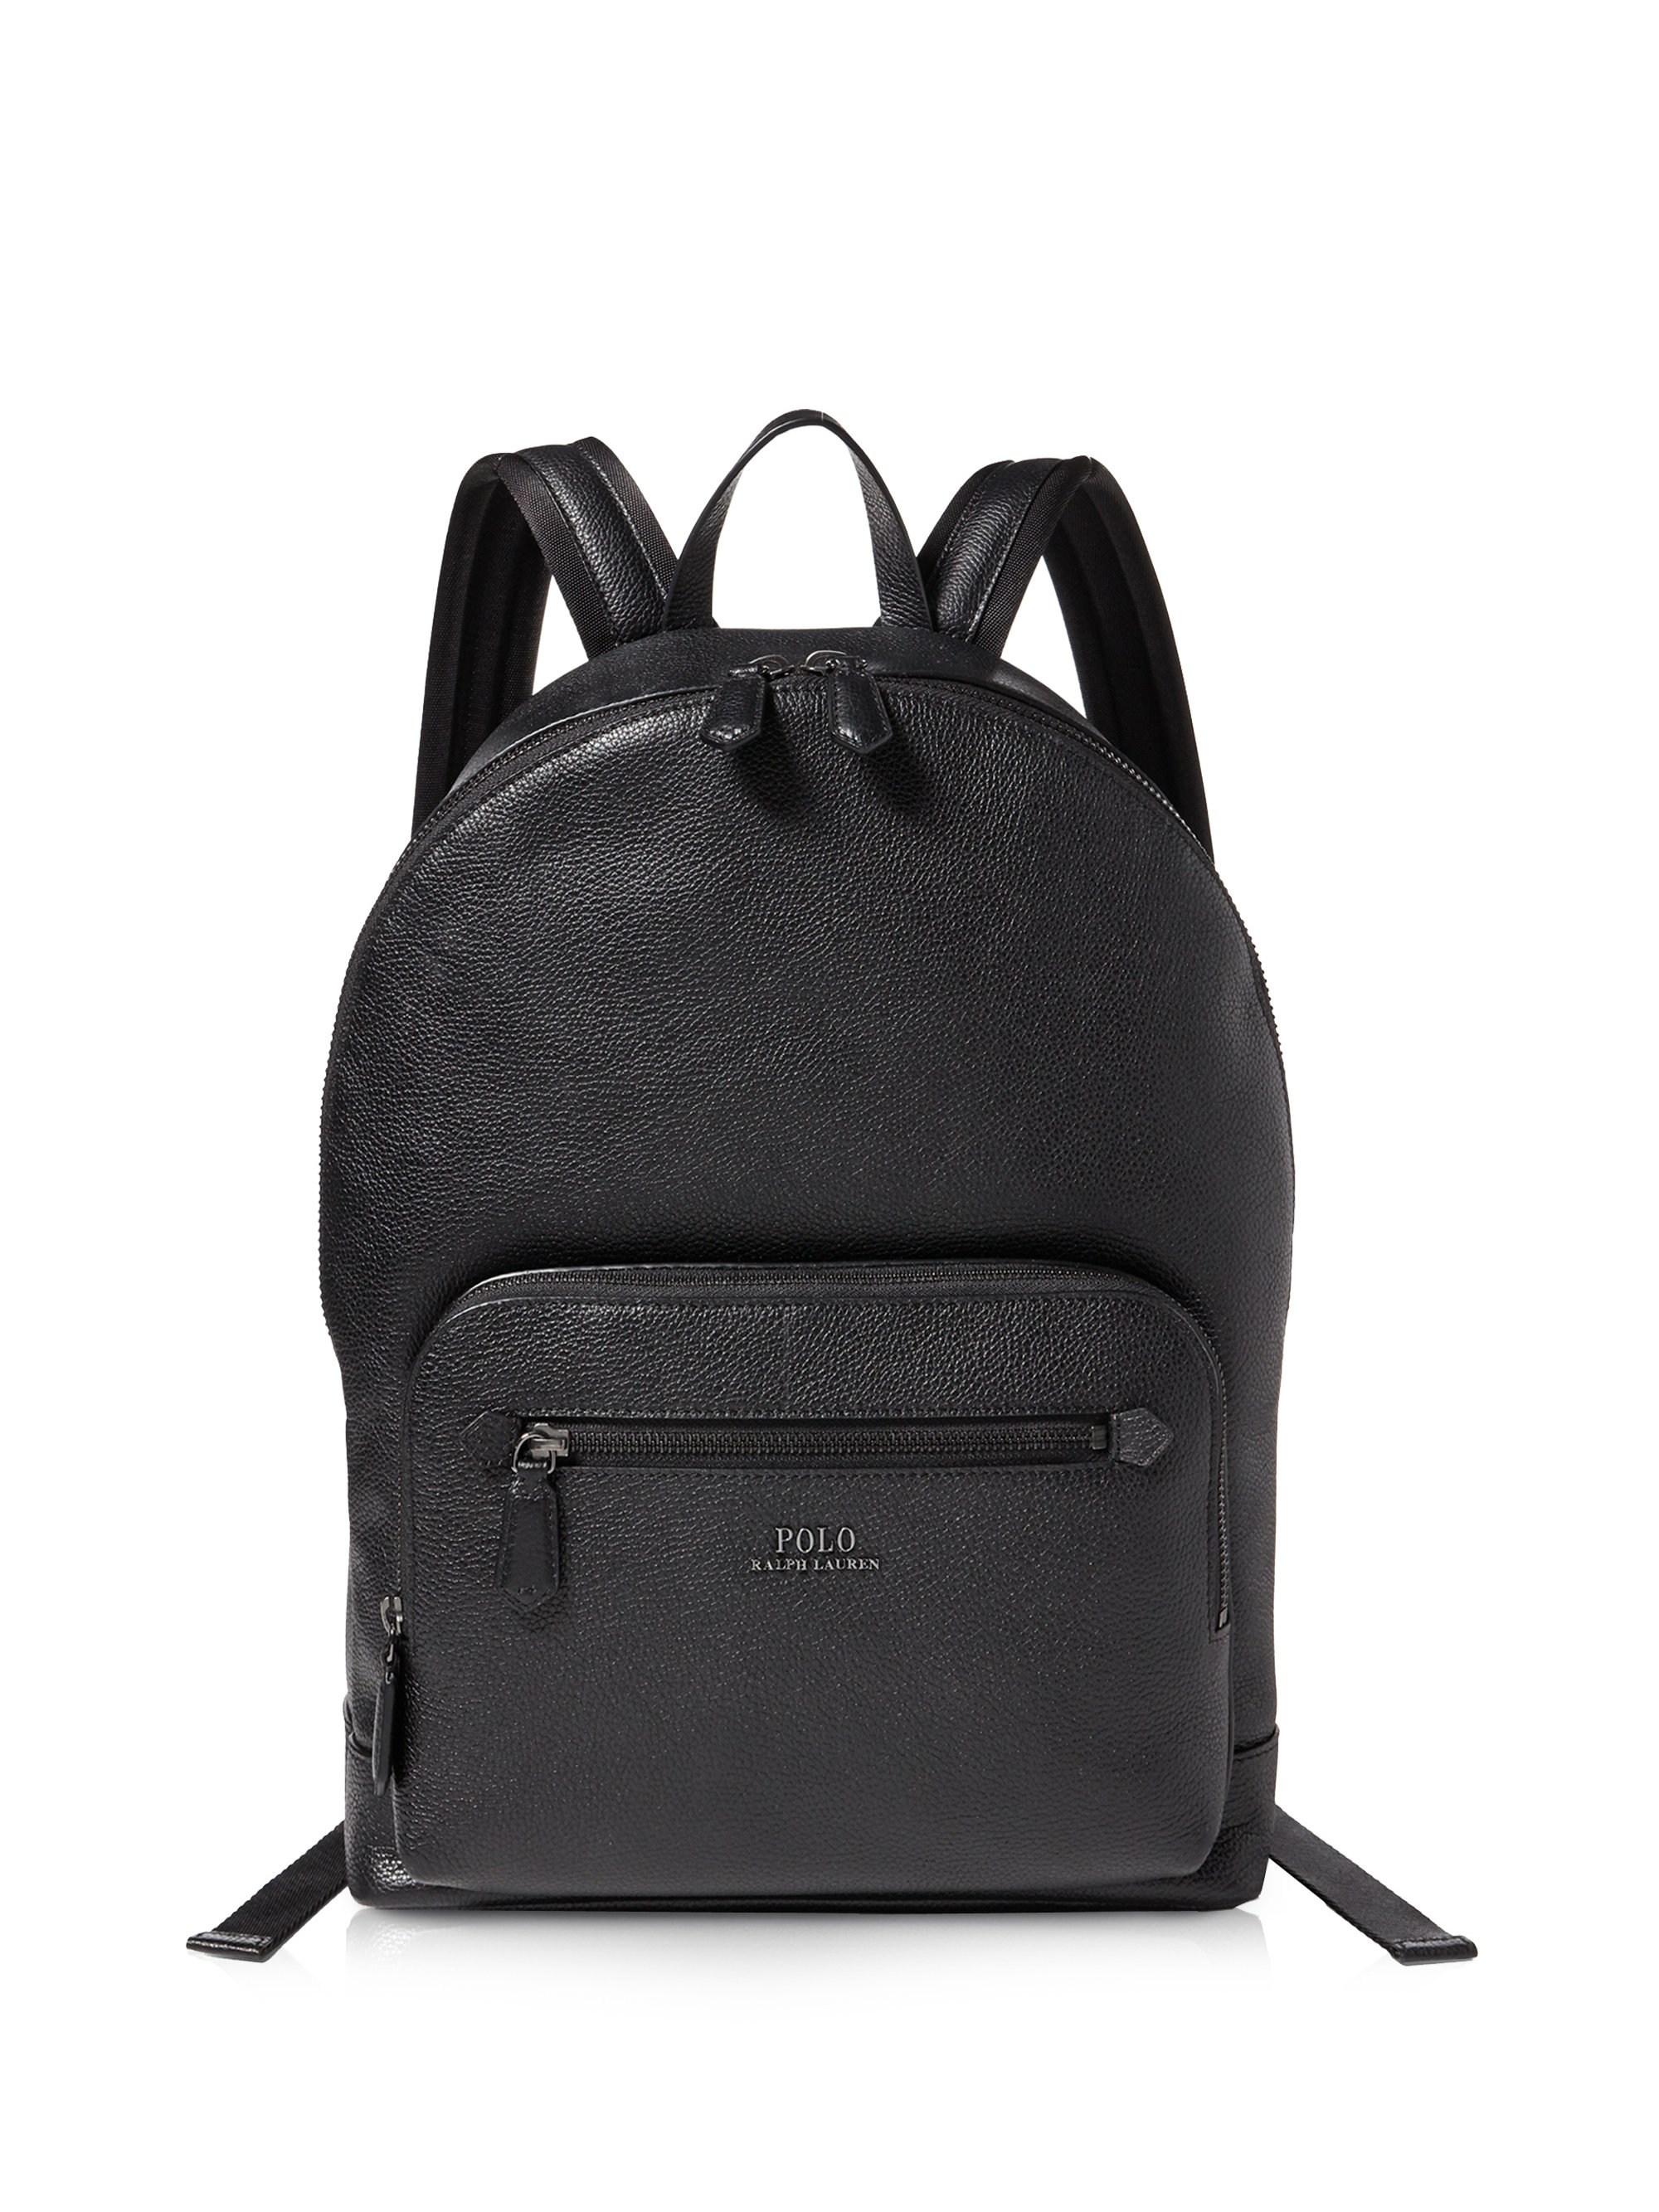 Polo Ralph Lauren Leather Pebbled Jacquard Backpack in Black for Men - Lyst